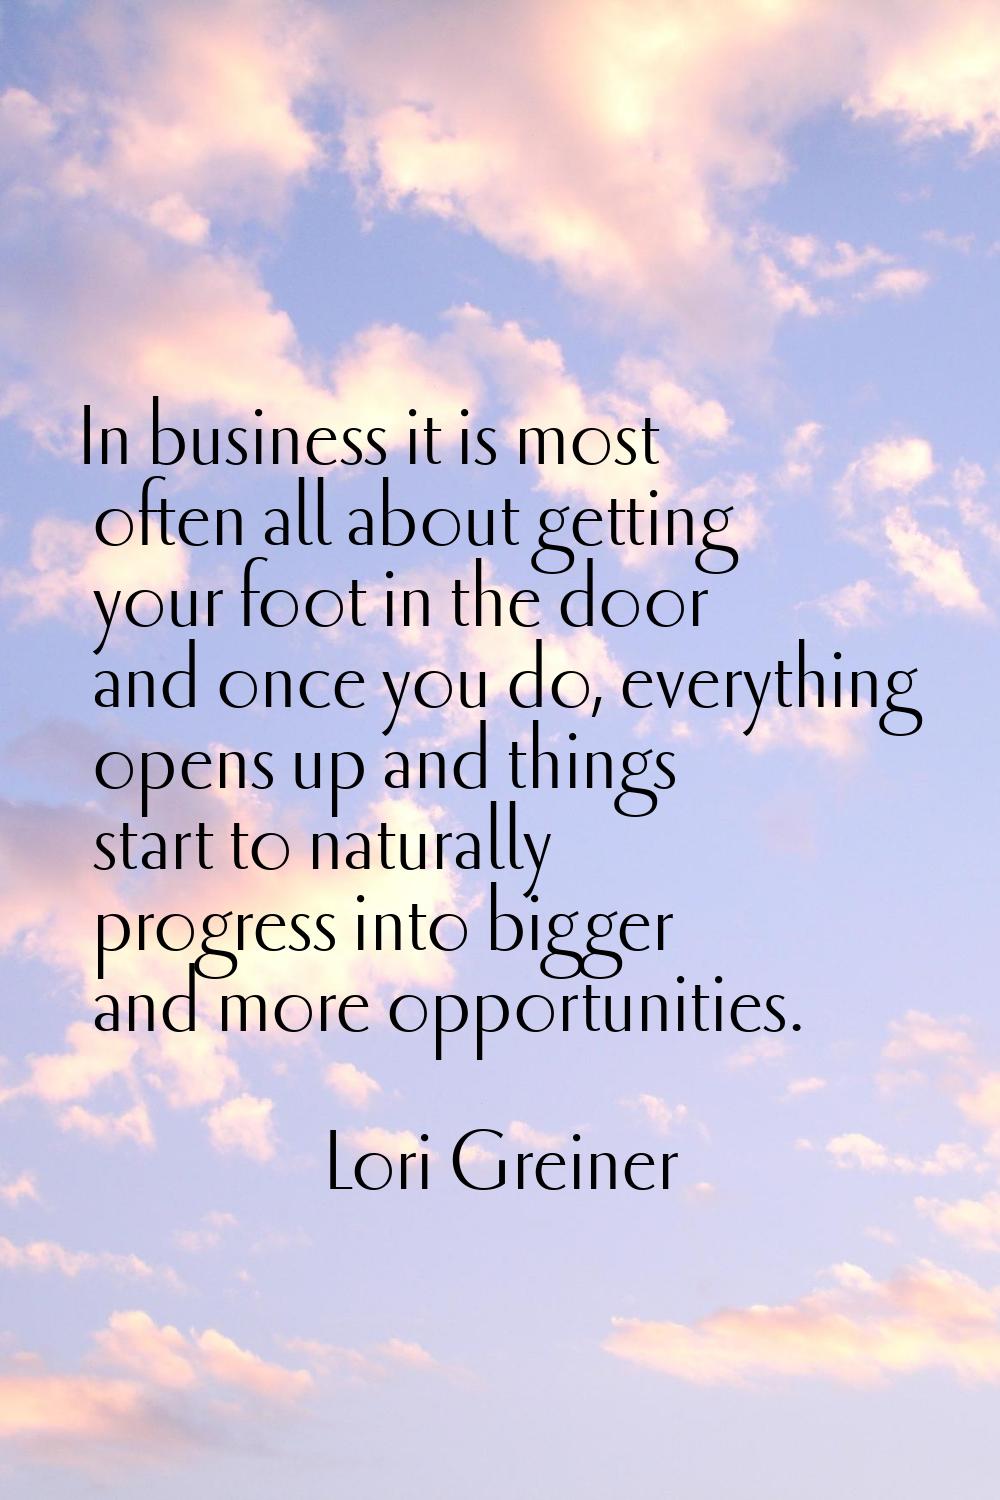 In business it is most often all about getting your foot in the door and once you do, everything op